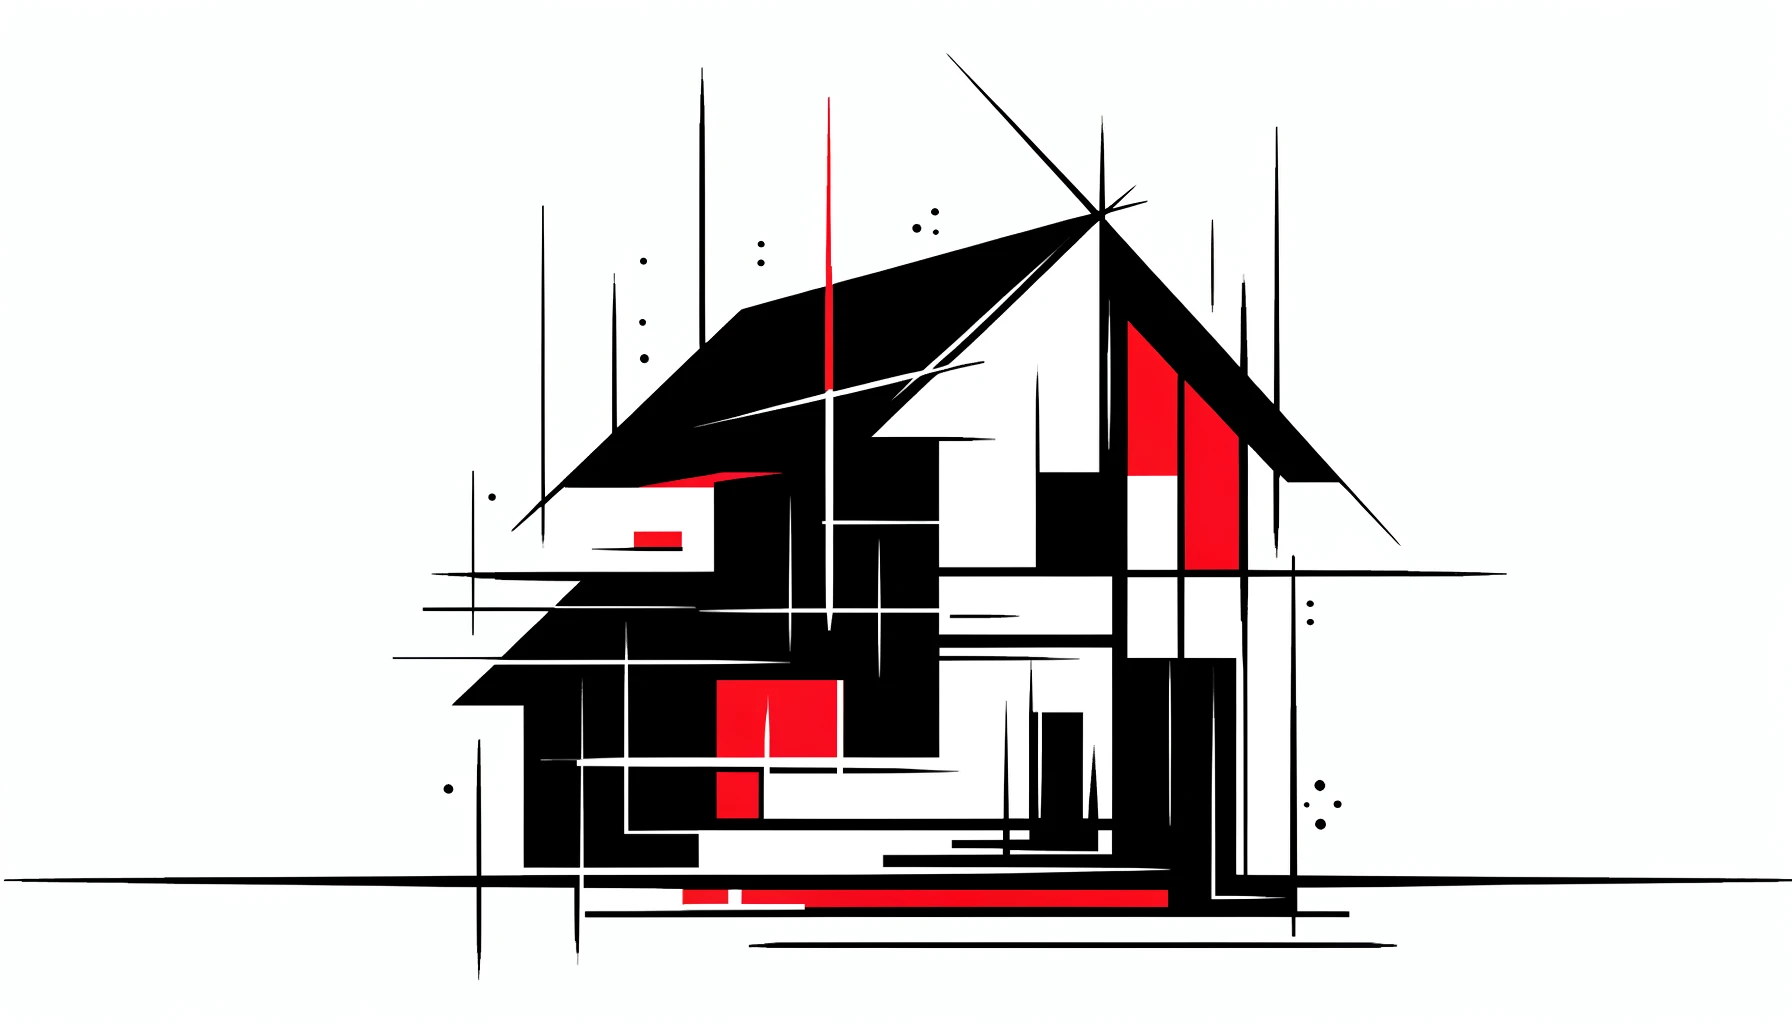 Abstract art featuring a bold black outline of a house with vibrant red accents, symbolizing dynamic and expansive houses.